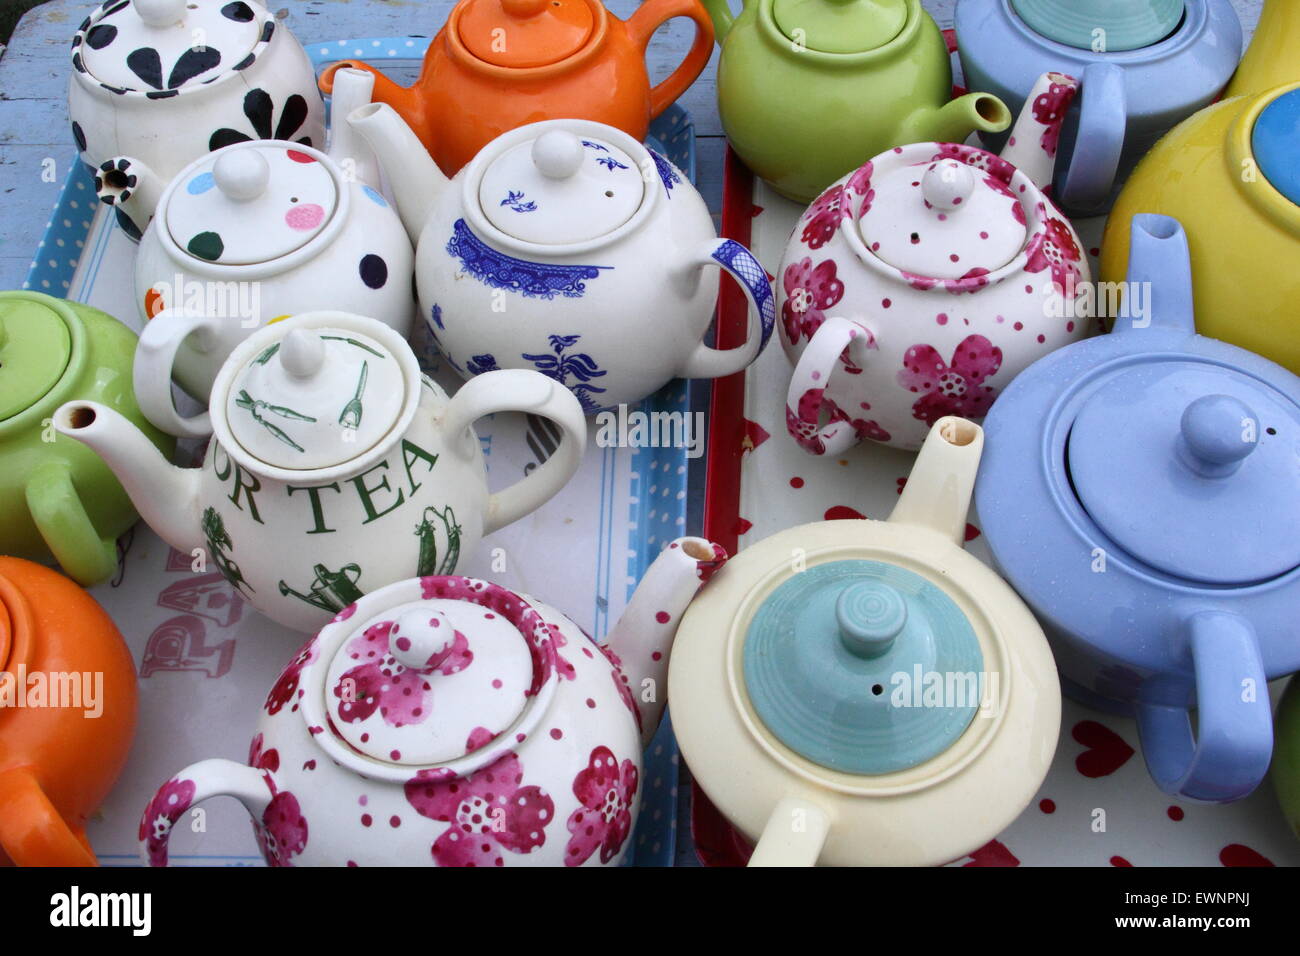 A collection of colourful teapots on a table at an outdoor tearoom at a British summer festival celebrating vintage style, England, UK Stock Photo